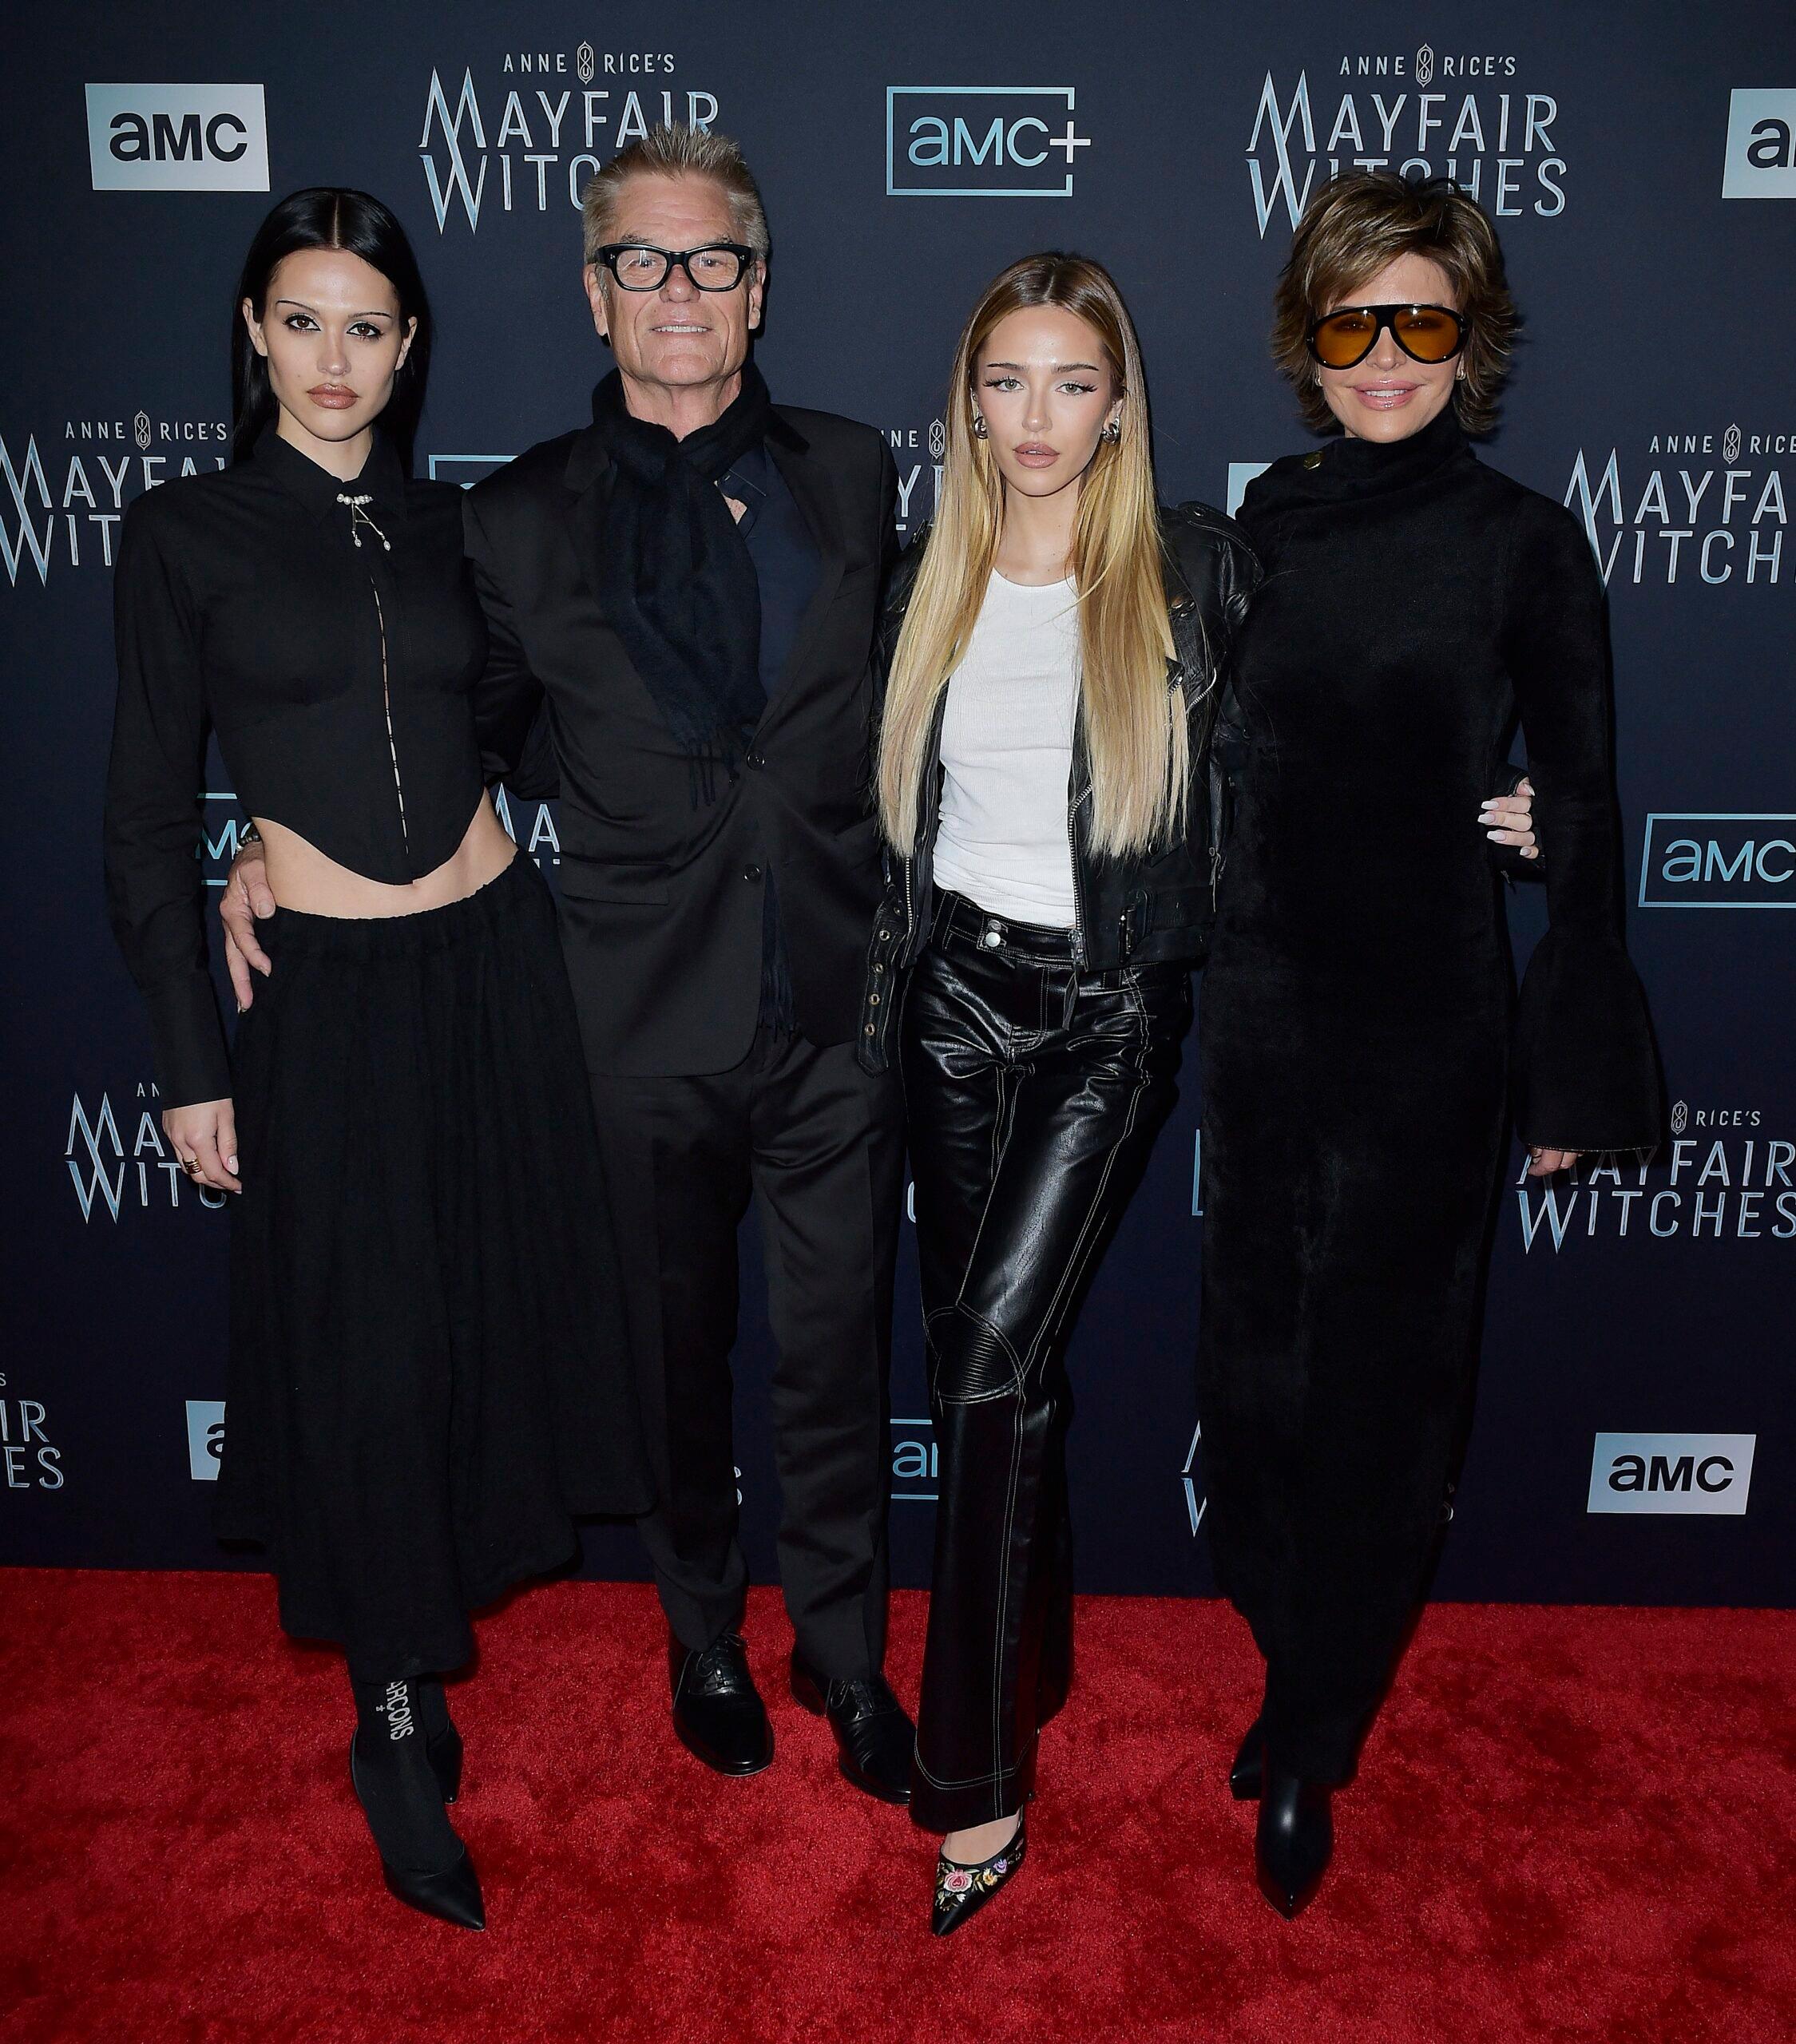 Los Angeles Premiere Of AMC Networks quot Anne Rice apos s Mayfair Witches quot